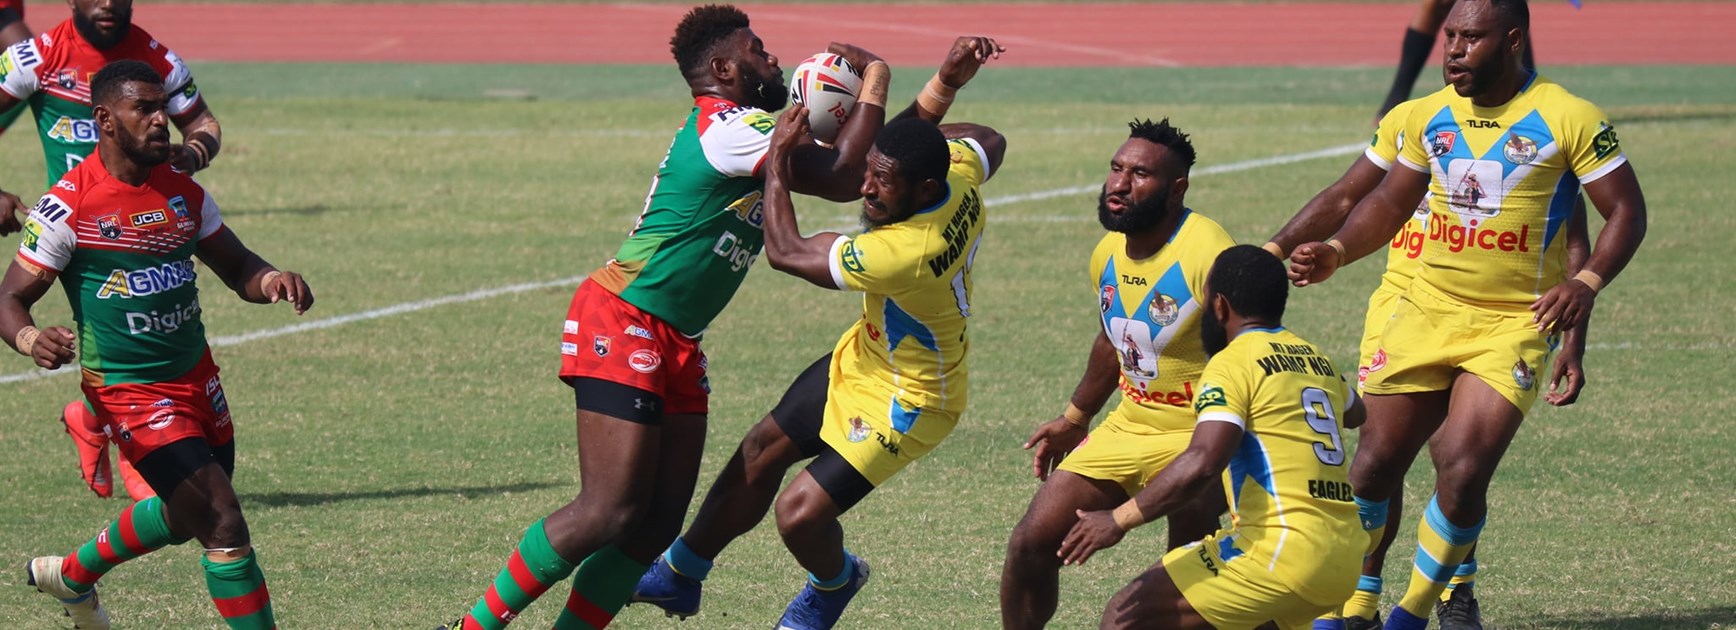 Rabaul Gurias and Mount Hagan in Round 1 of the Digicel Cup. Photo: PNG Hunters Media